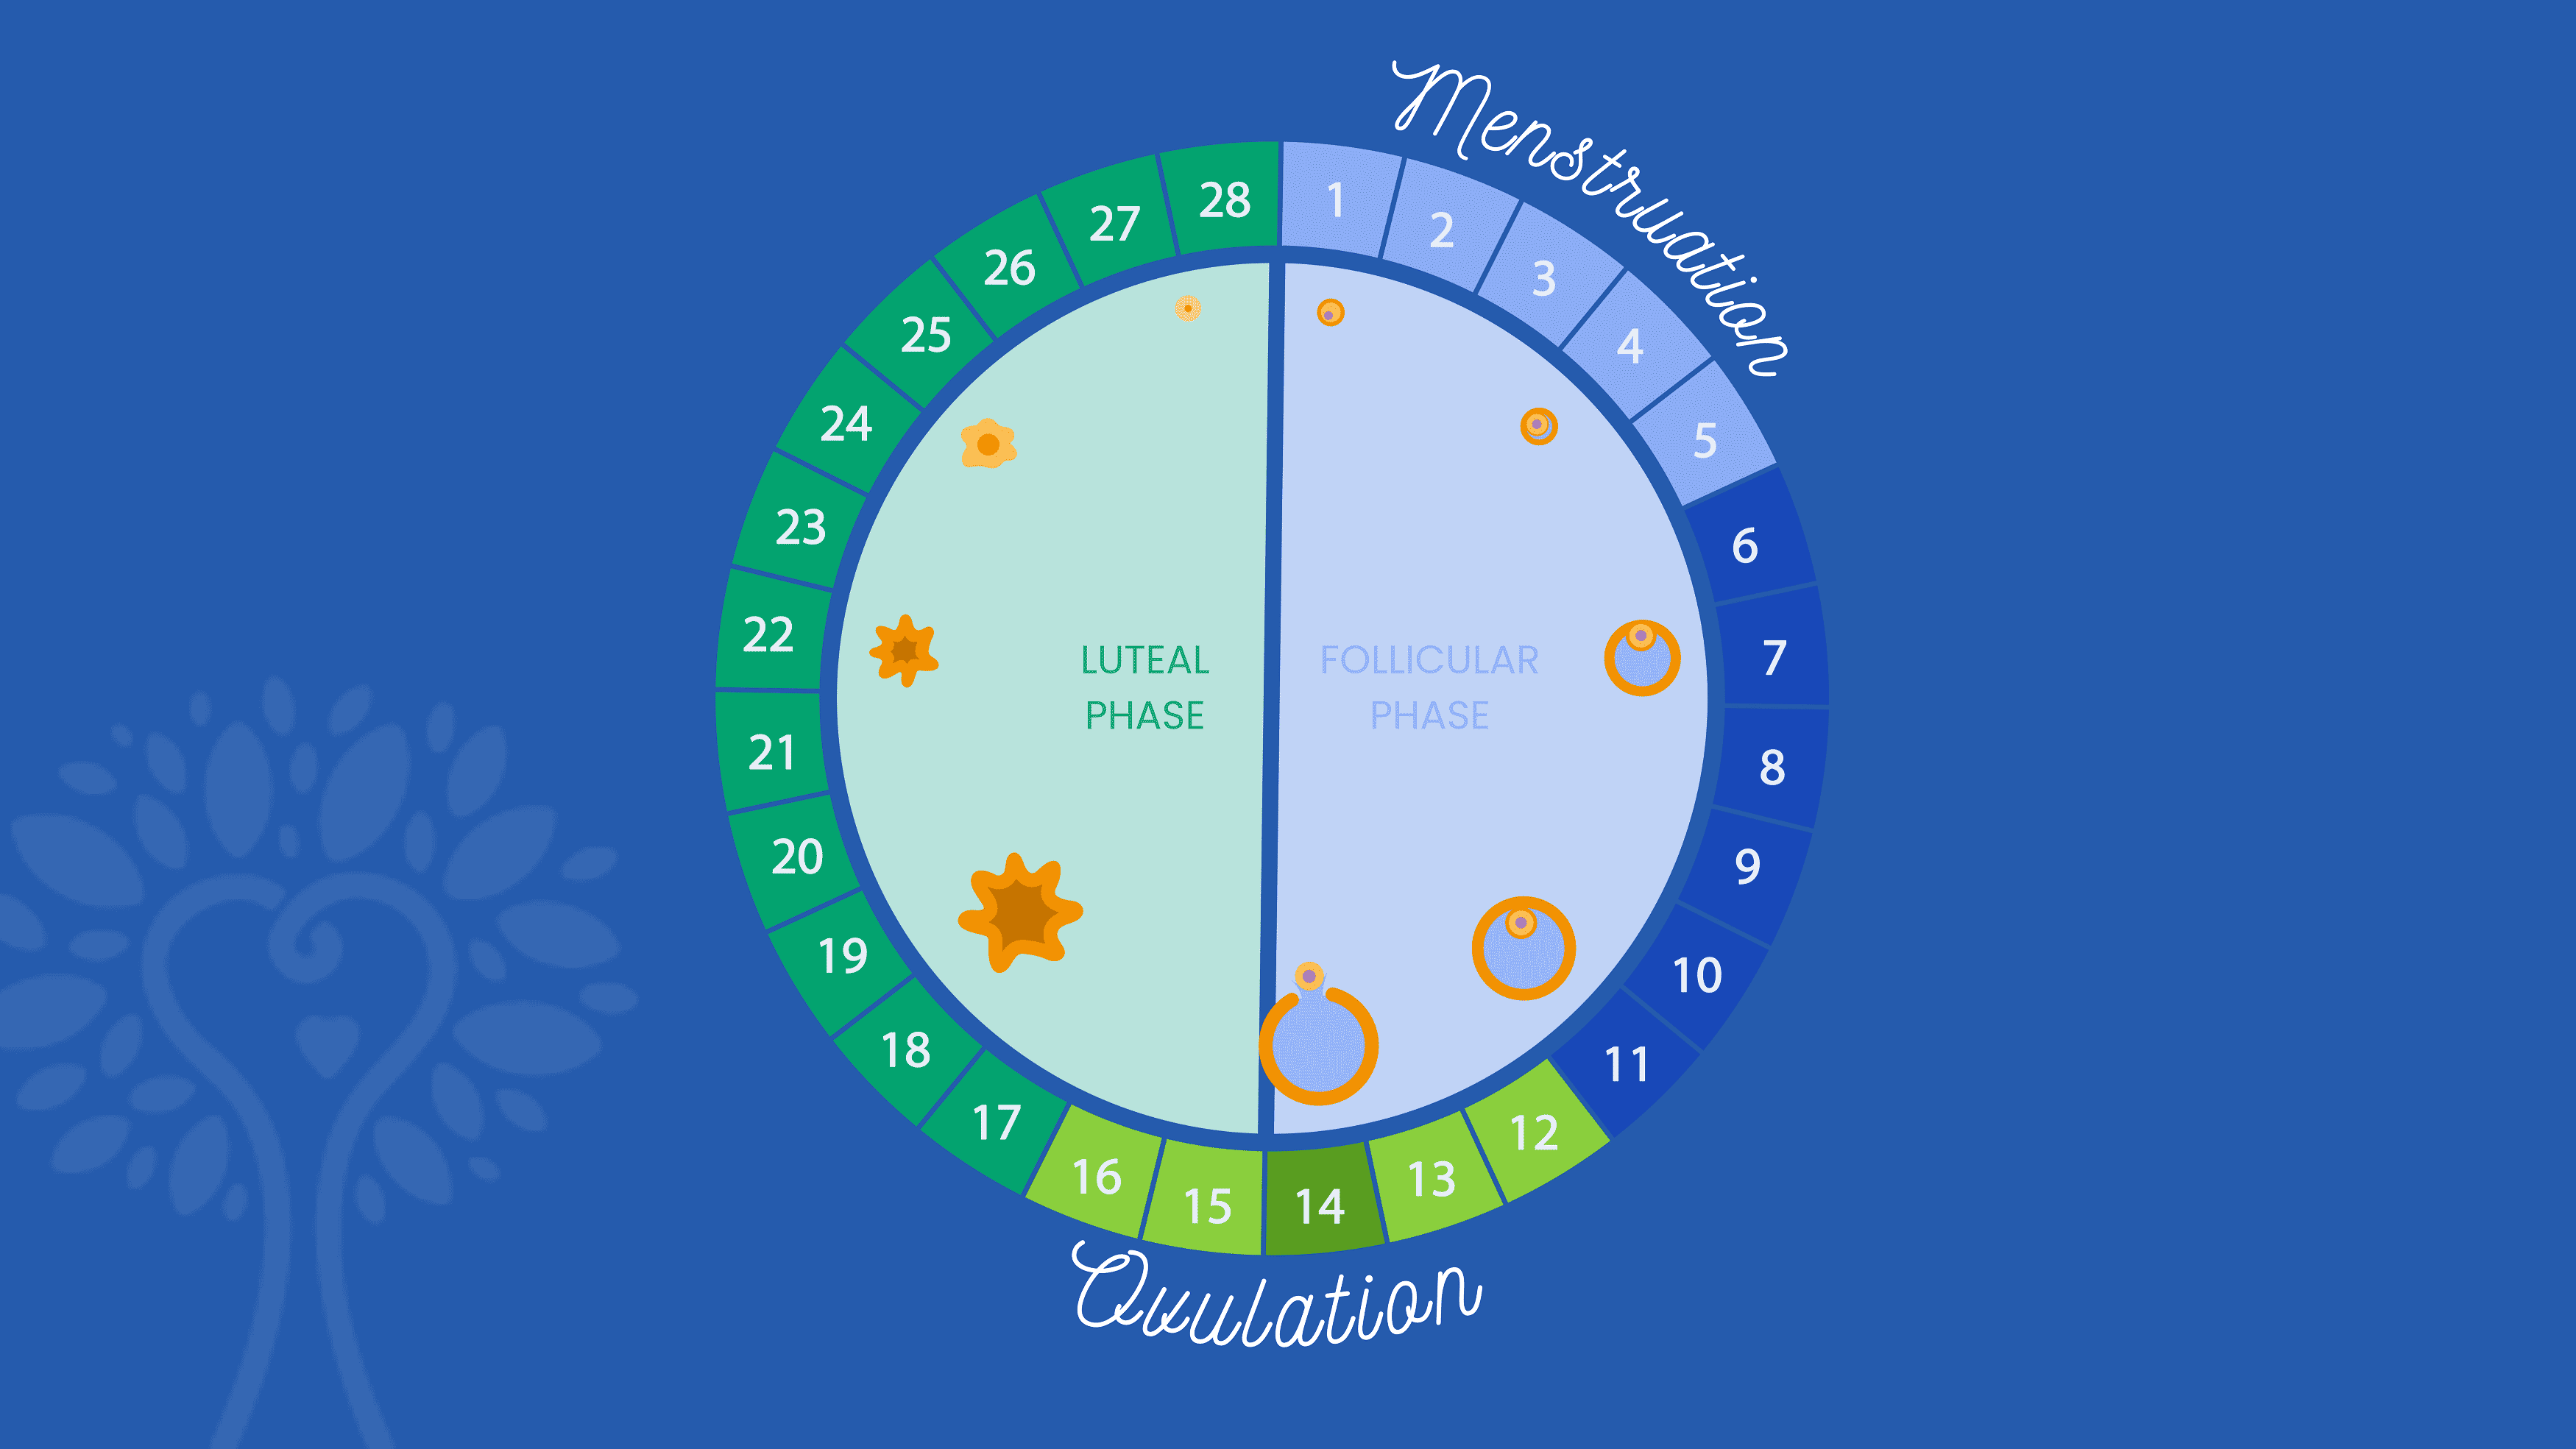 Dark blue background with circular IVF calendar showing the 28 days of a menstrual cycle with the word “Menstruation” spanning days 1 through 5 and the word “Ovulation” spanning days 12 through 16. The numbers are colored different shades of blue and green according to their phase.